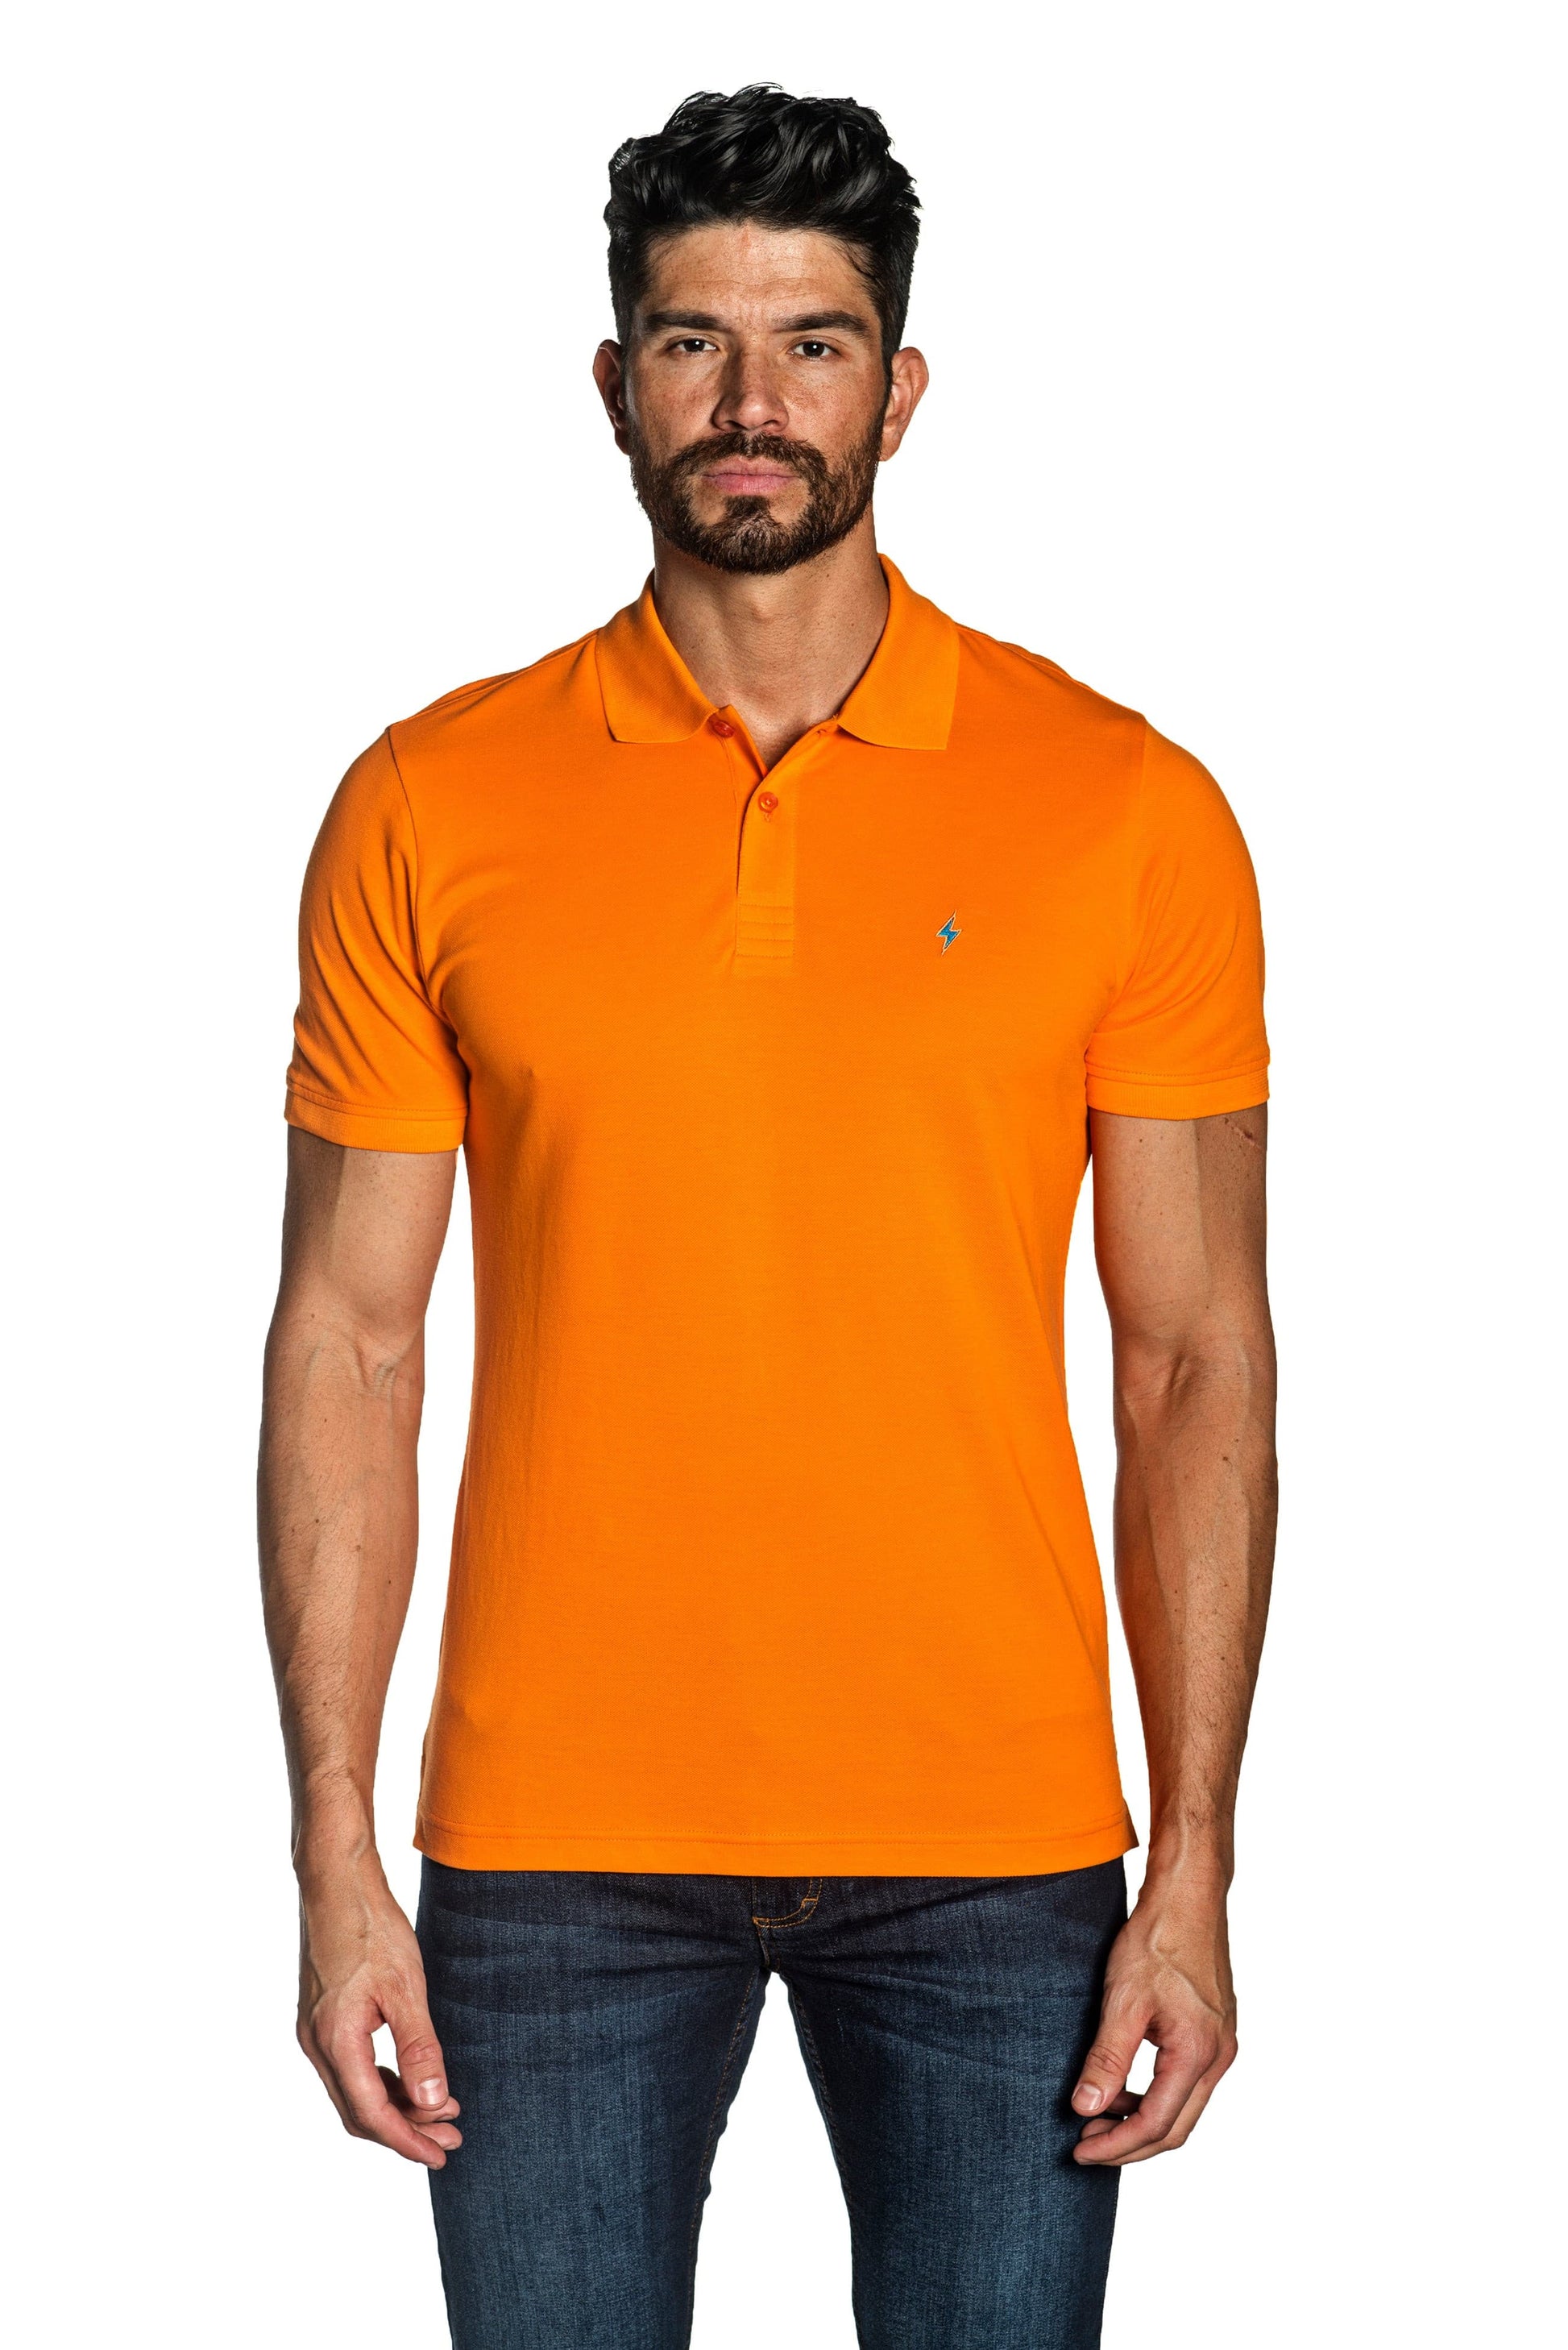 Orange Mens Polo With Lightning Embroidery P-31.